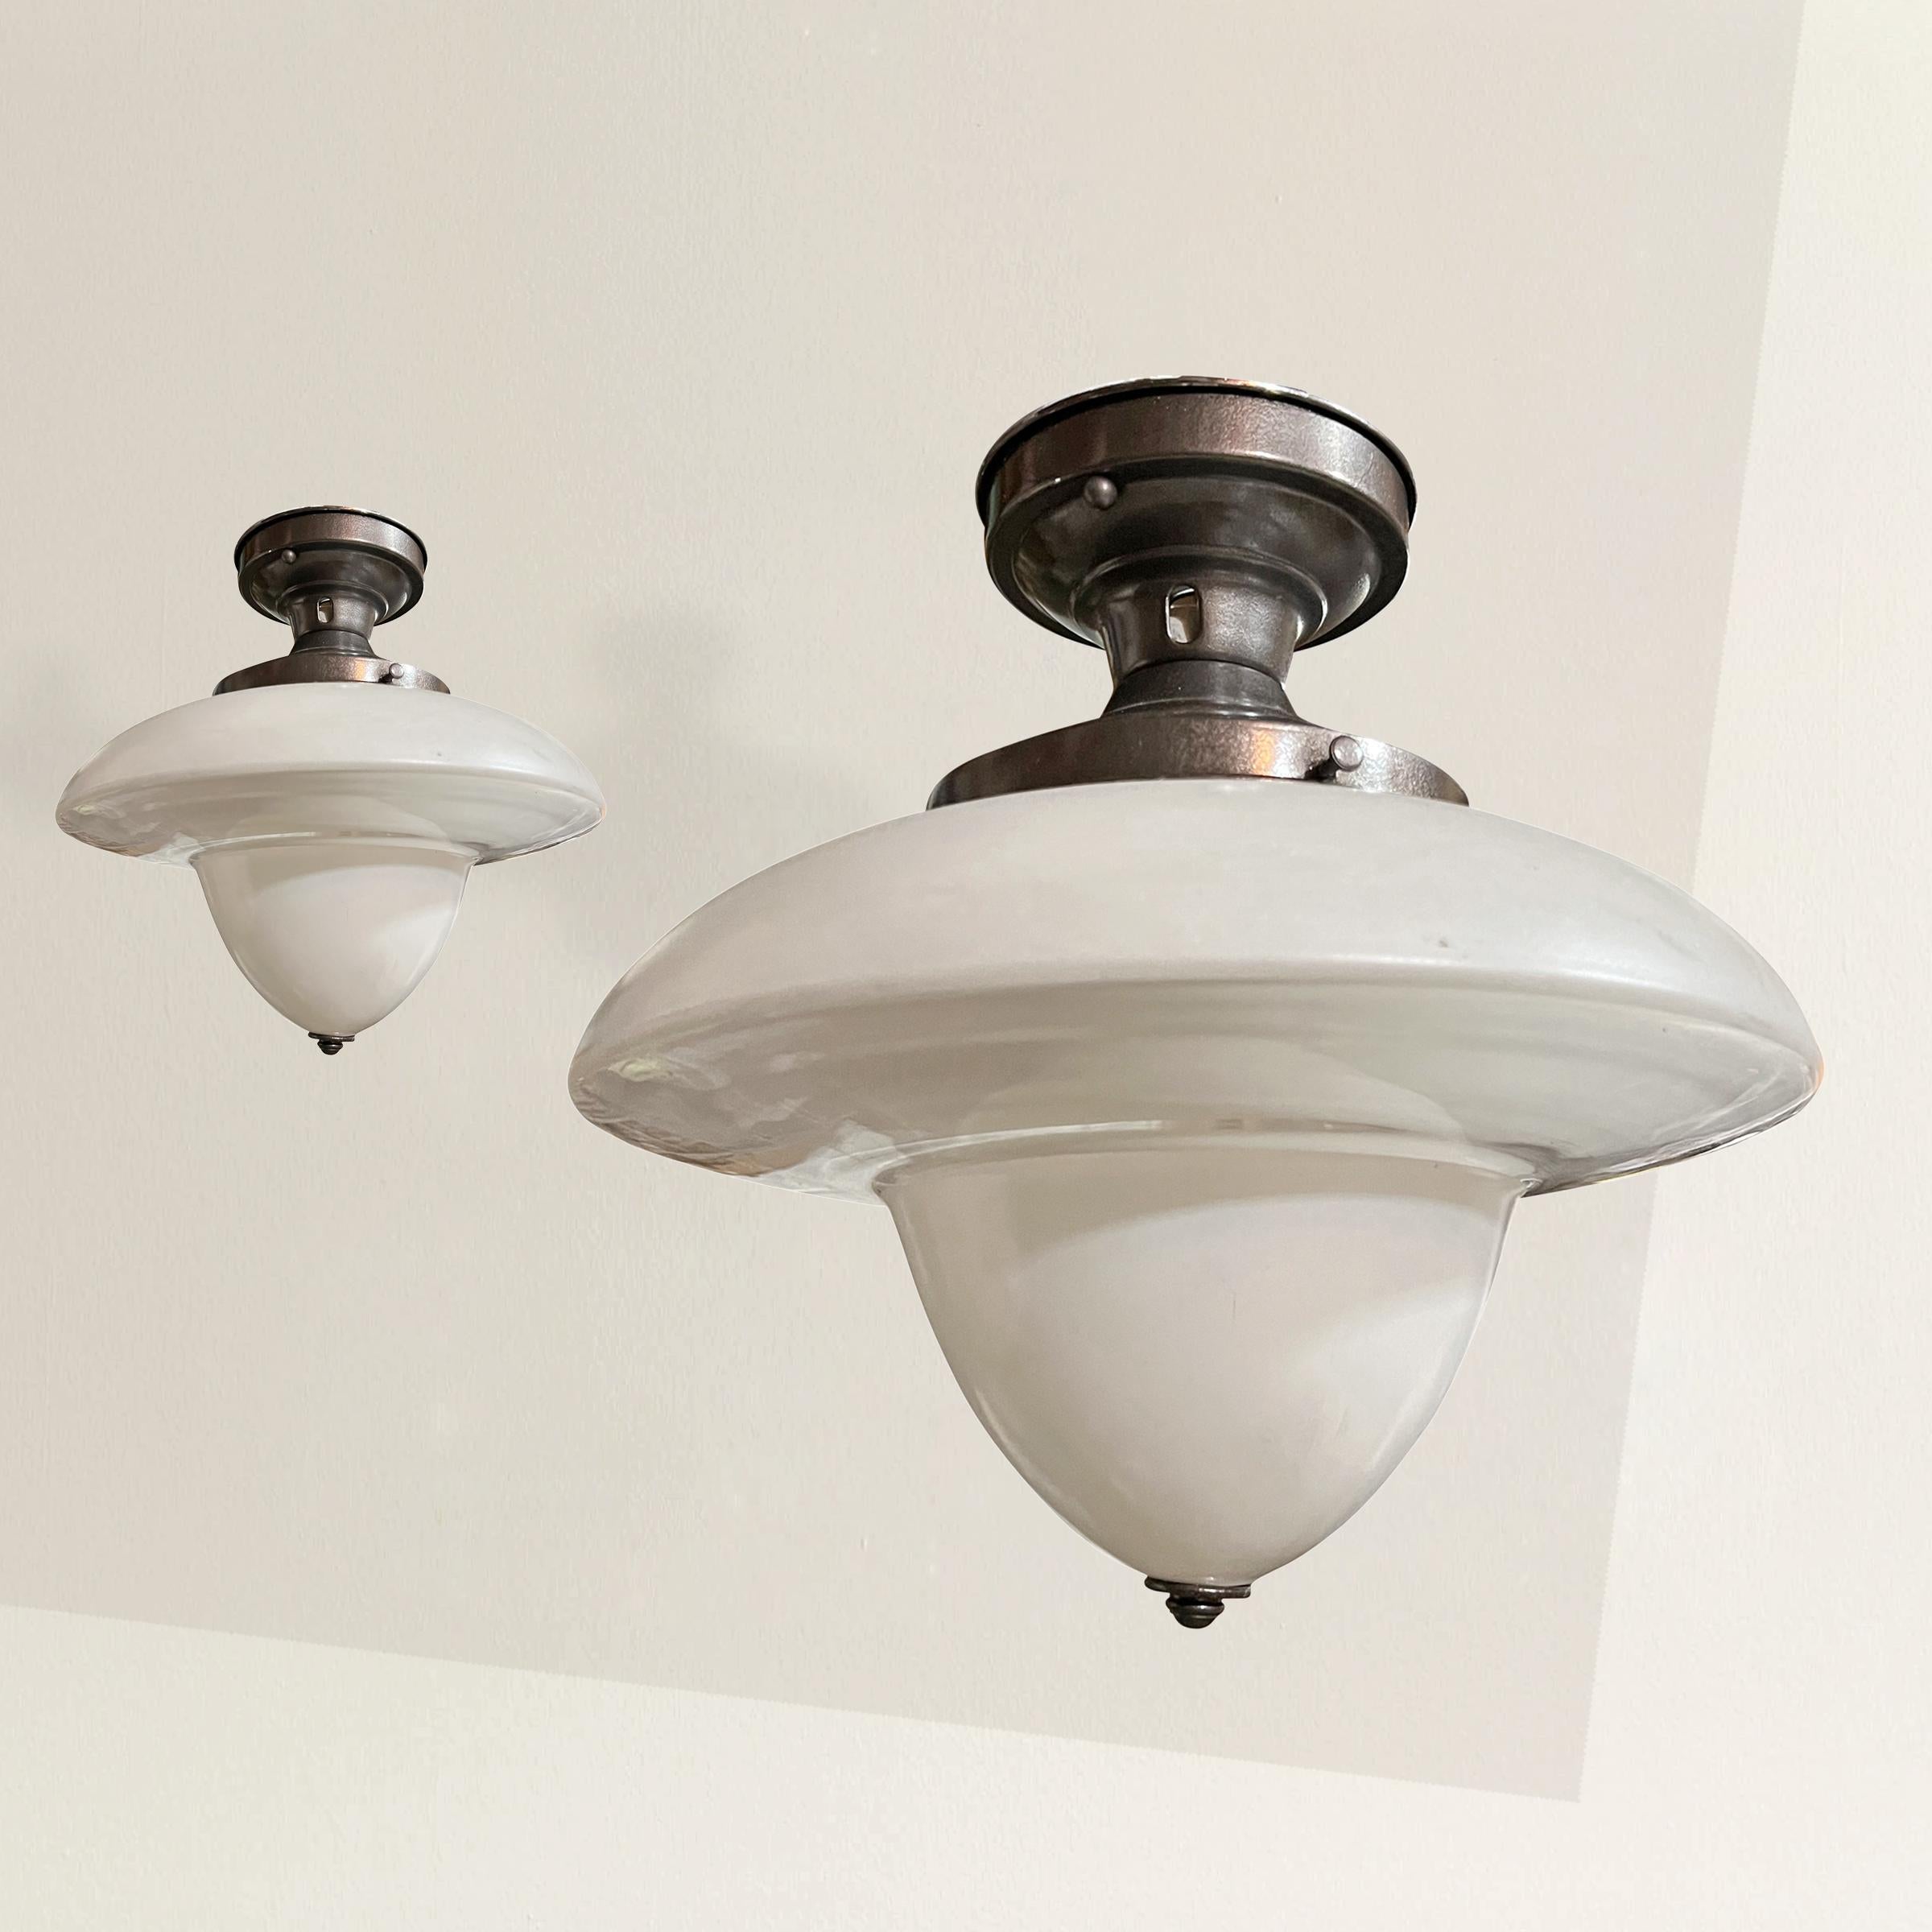 A stunning pair of unique early 20th century American schoolhouse fixtures with clear and opaque glass shades. The tops and conical sections are opaque and the undersides are clear. Perfect for your butler's pantry, kitchen, or down a hallway. Newly